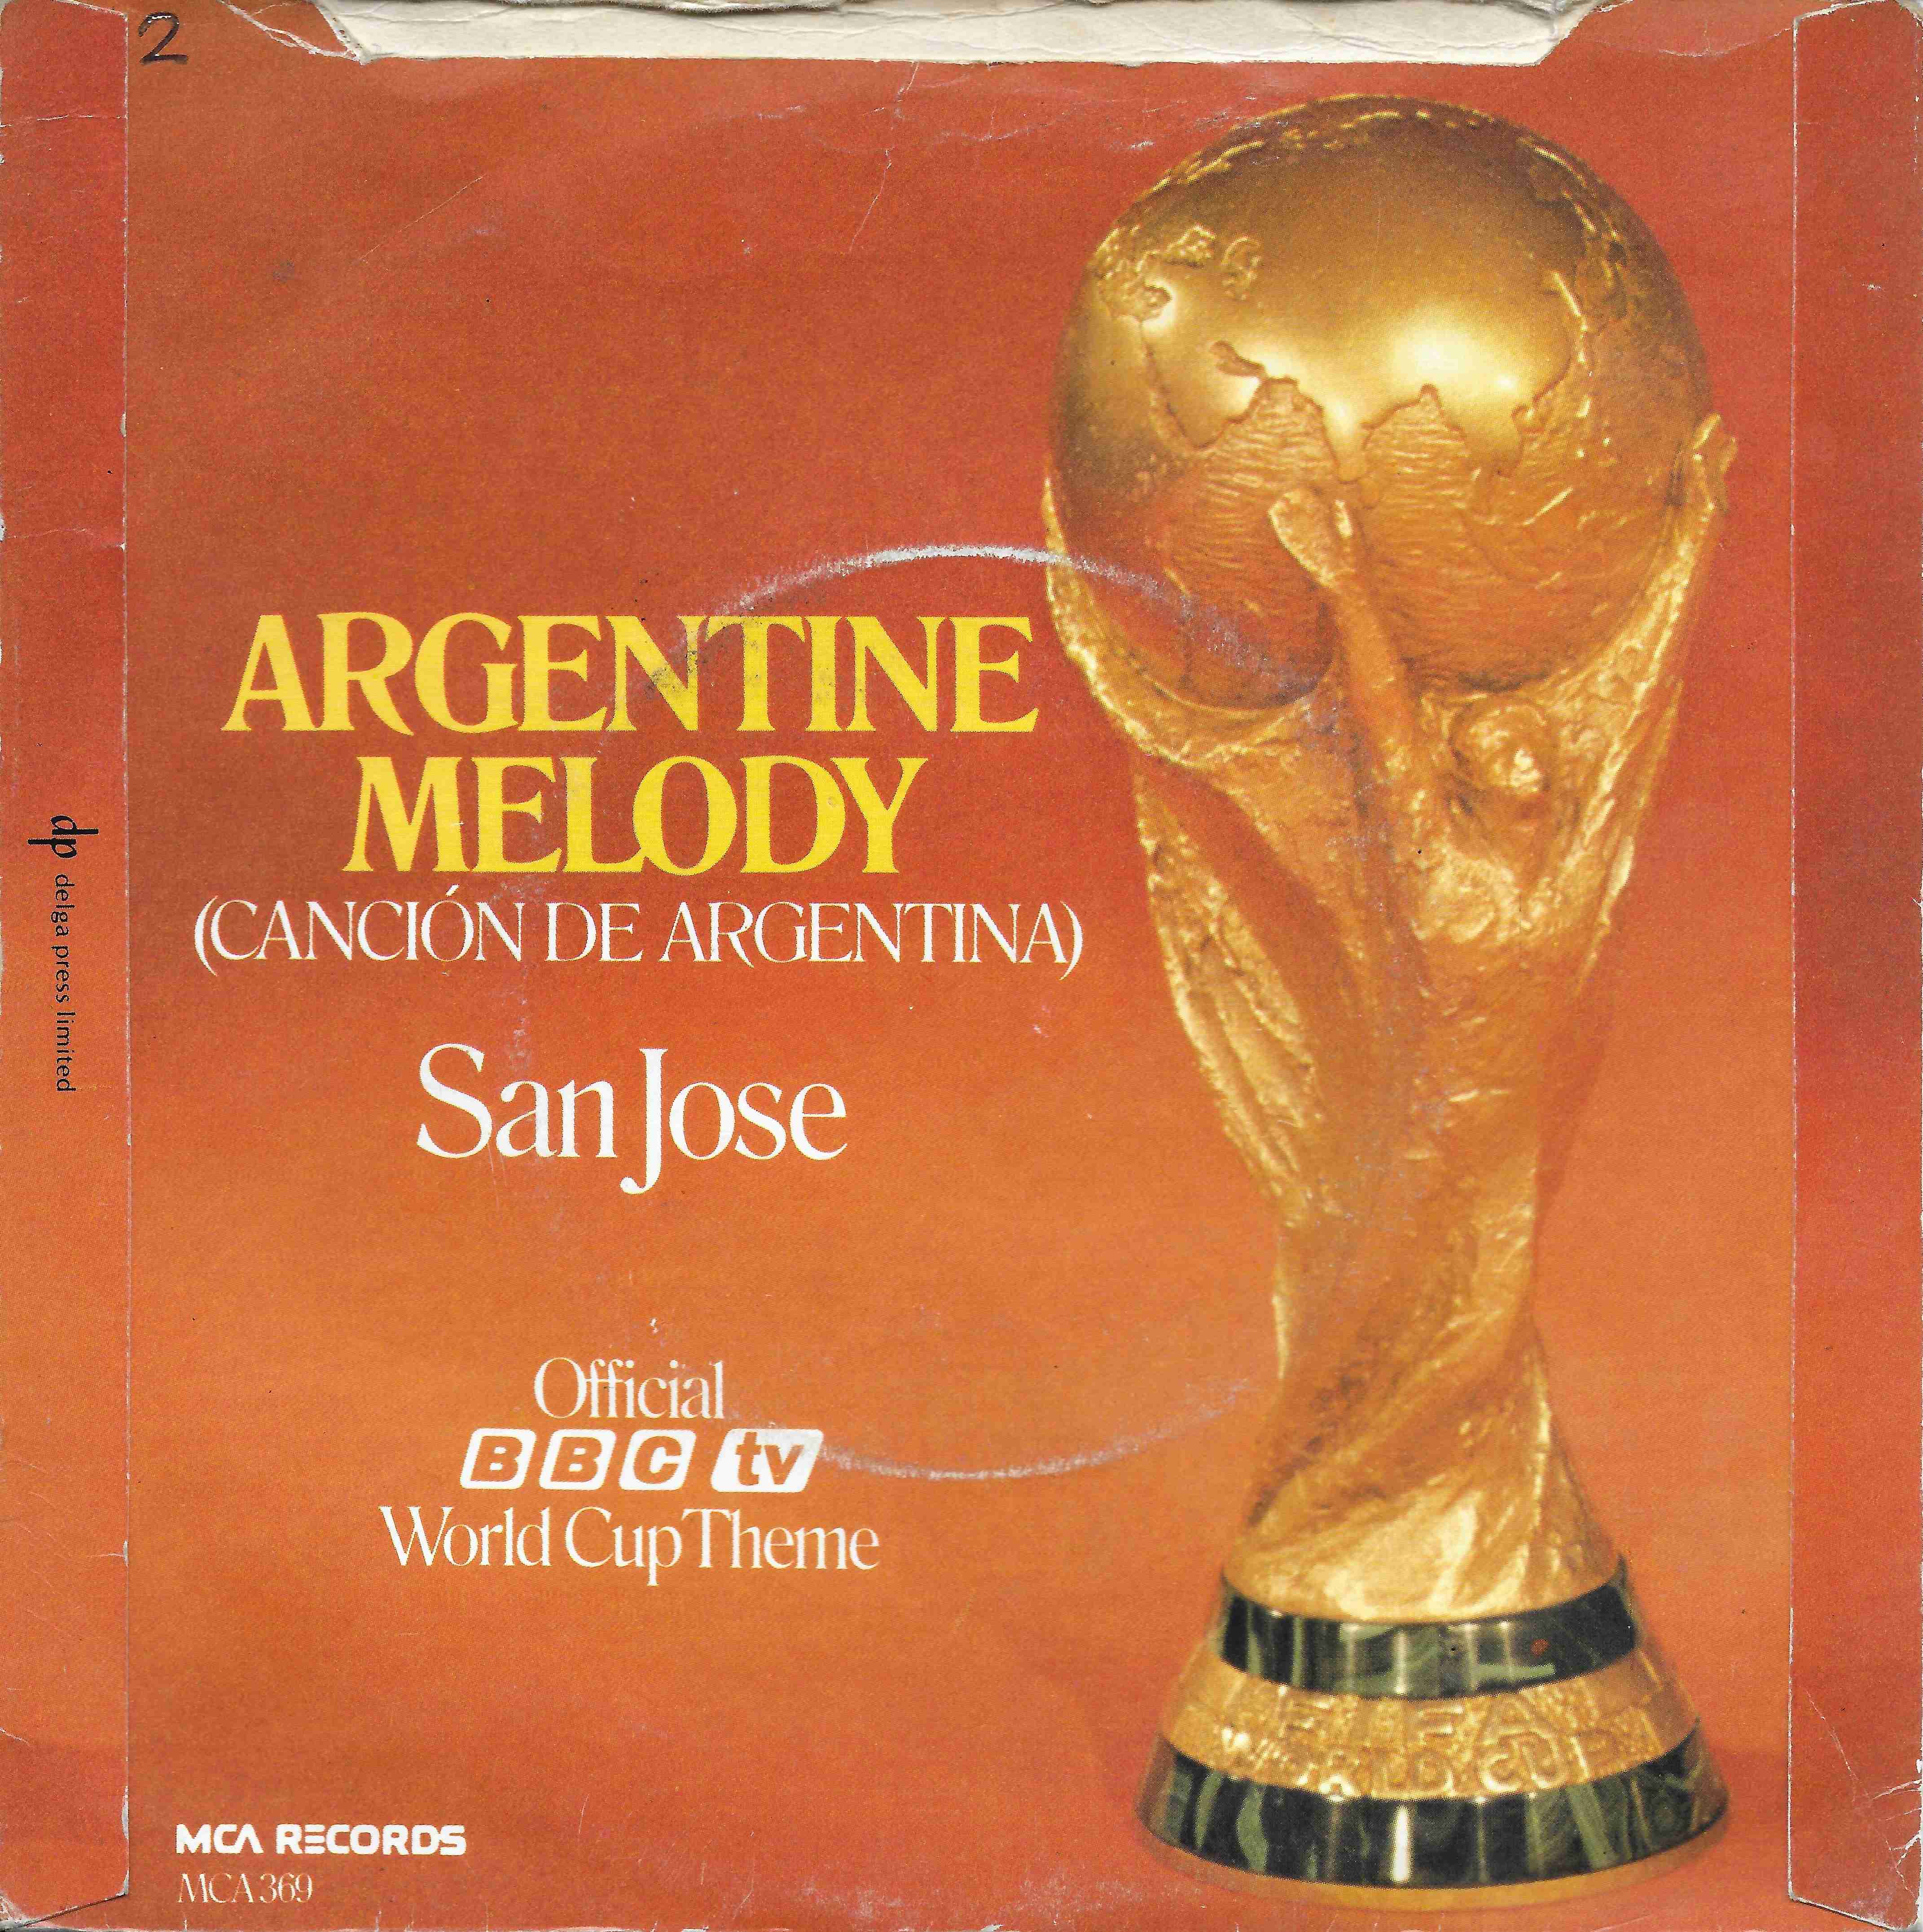 Picture of MCA 369 Argentine melody (World Cup (1978)) by artist Andrew Lloyd Webber / San Jose from the BBC records and Tapes library